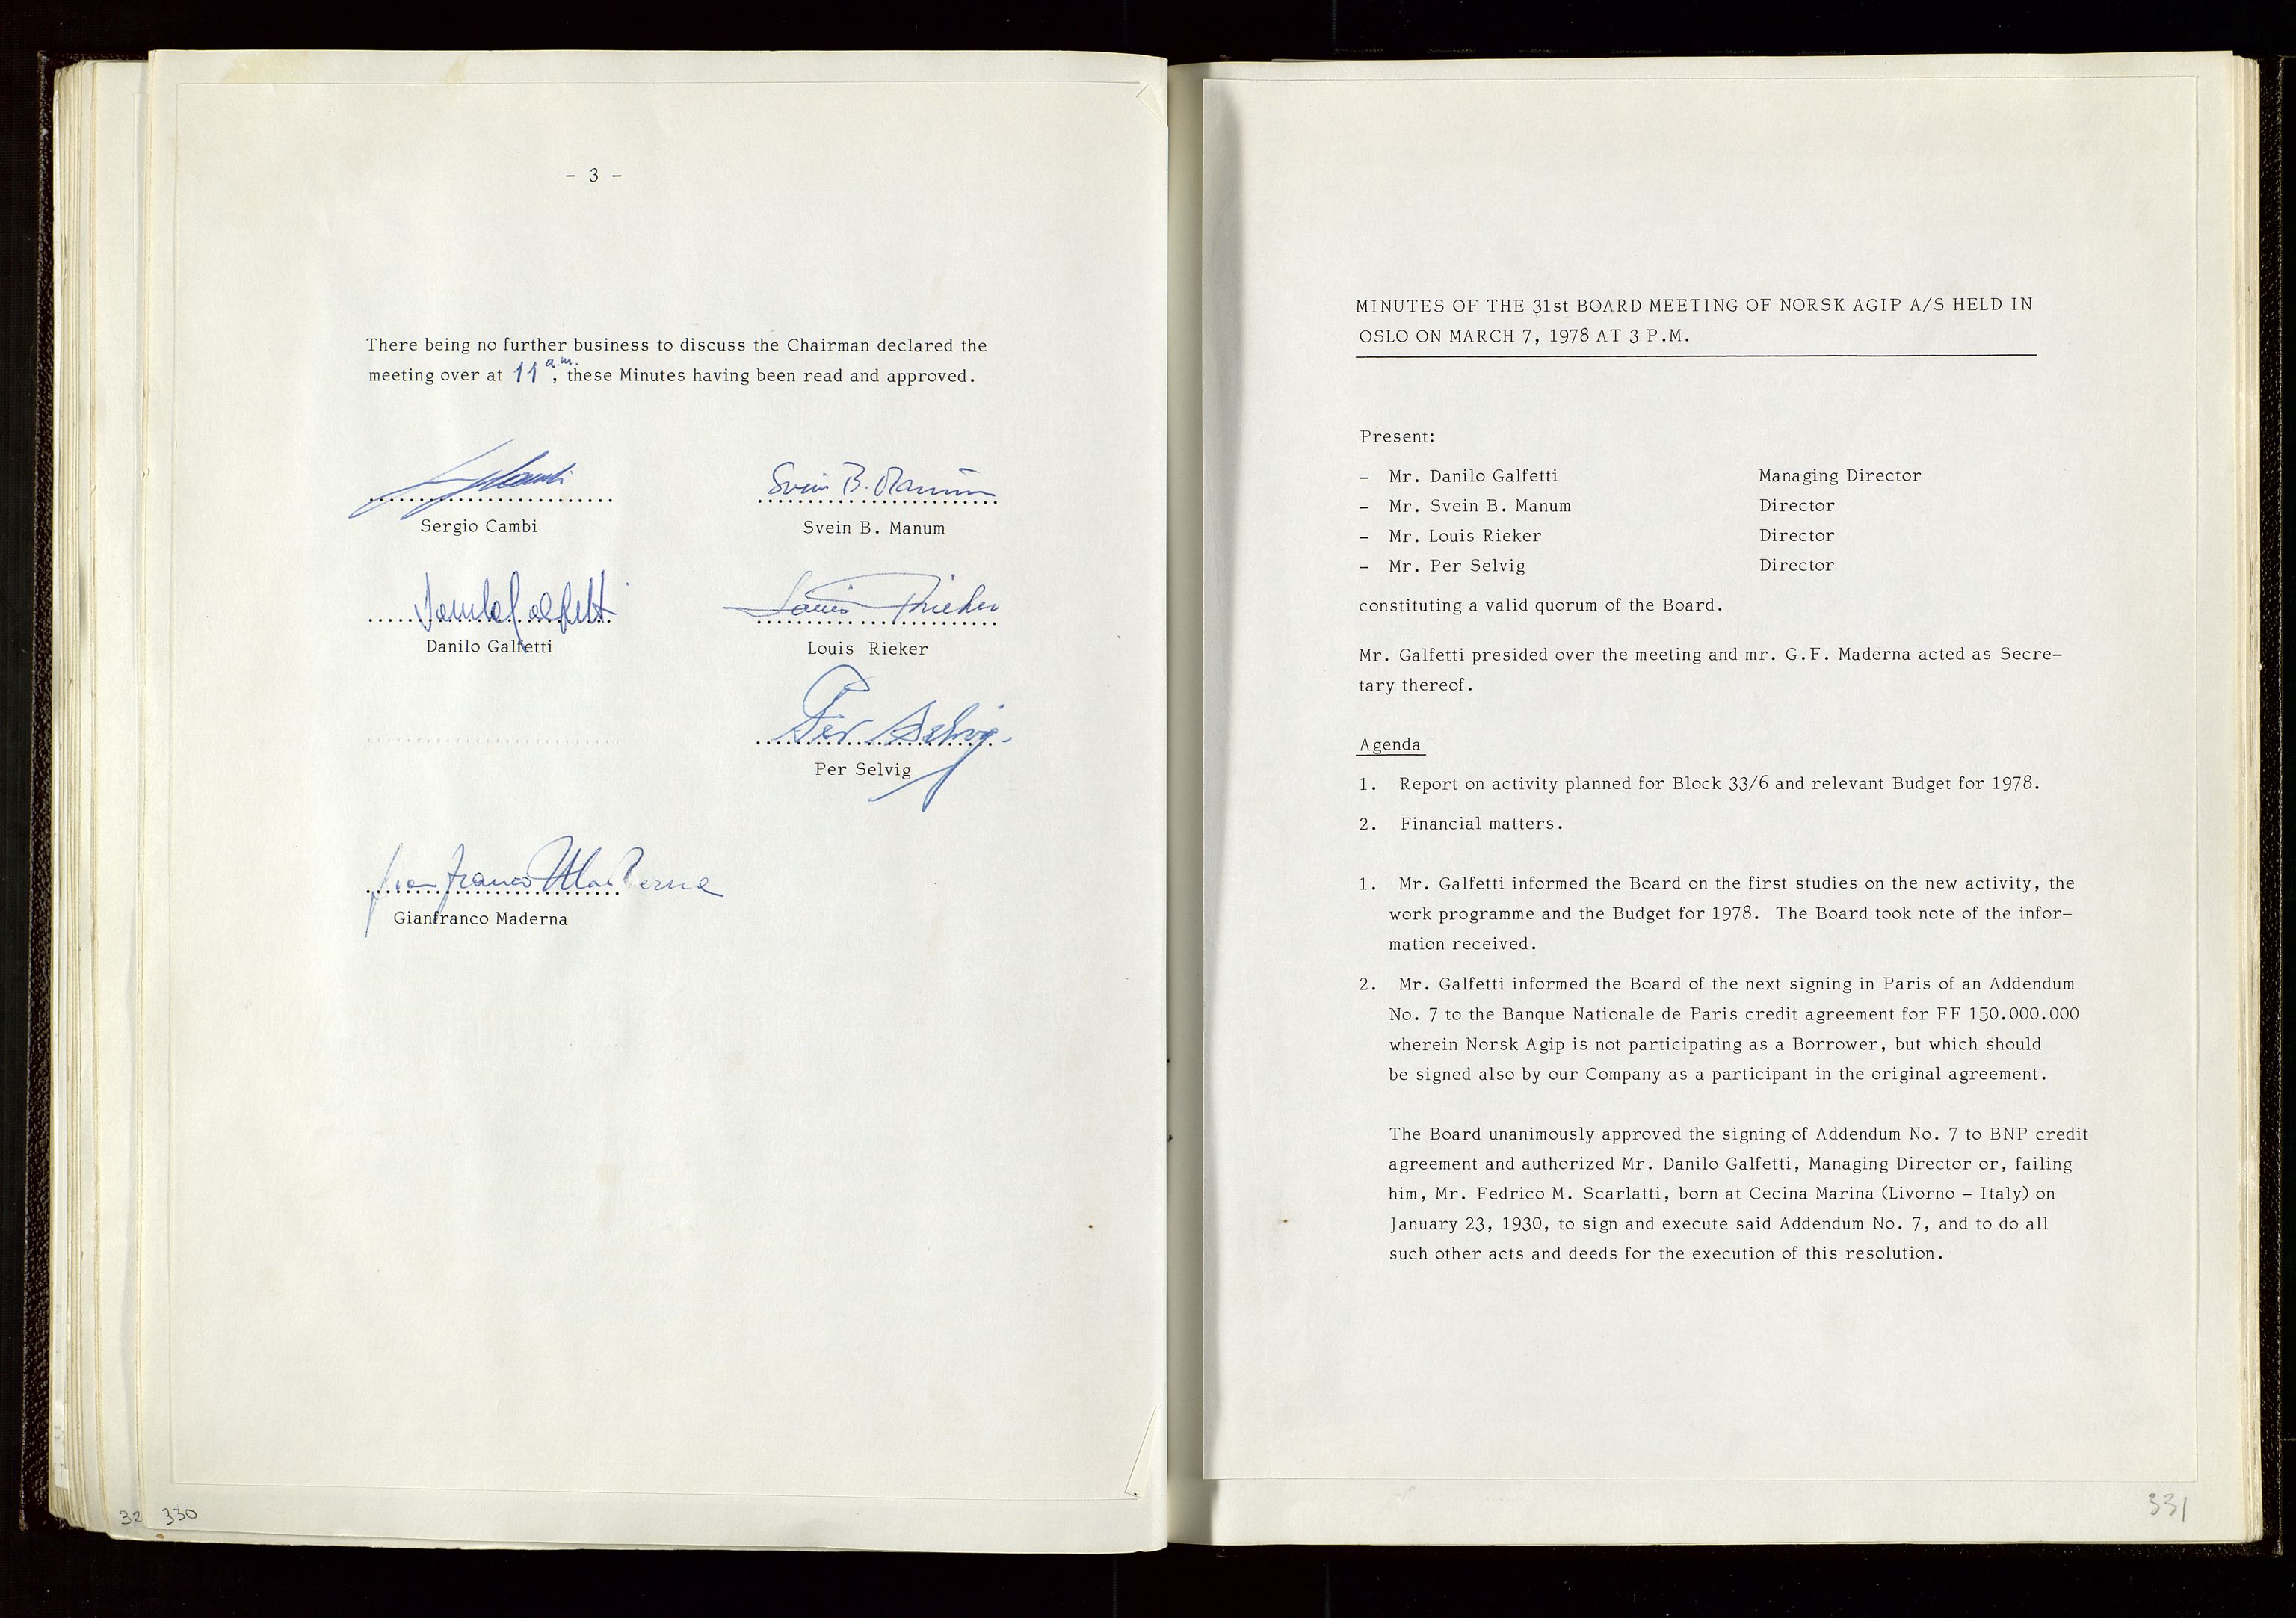 Pa 1583 - Norsk Agip AS, SAST/A-102138/A/Aa/L0002: General assembly and Board of Directors meeting minutes, 1972-1979, p. 330-331